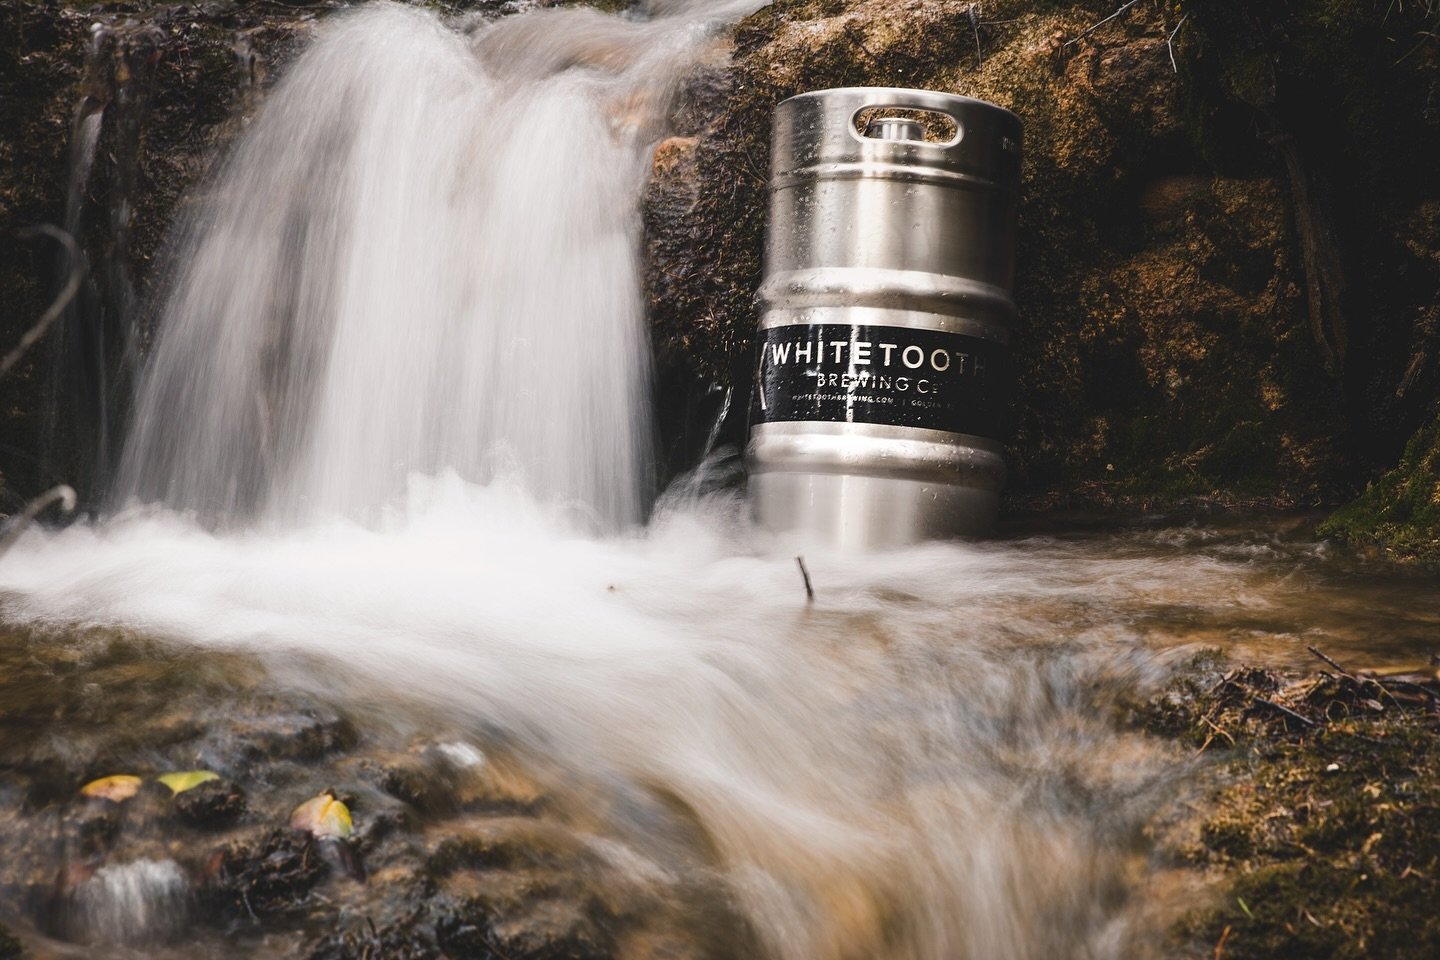 🍻 KEGS TO GO 🍻

Heads up, beer pals! If you&rsquo;ve been thinking of ordering a keg for an upcoming event, party or just a weekend with friends (May Long 👀)&hellip;we&rsquo;ve just added three limited release beers to our keg to go online orderin